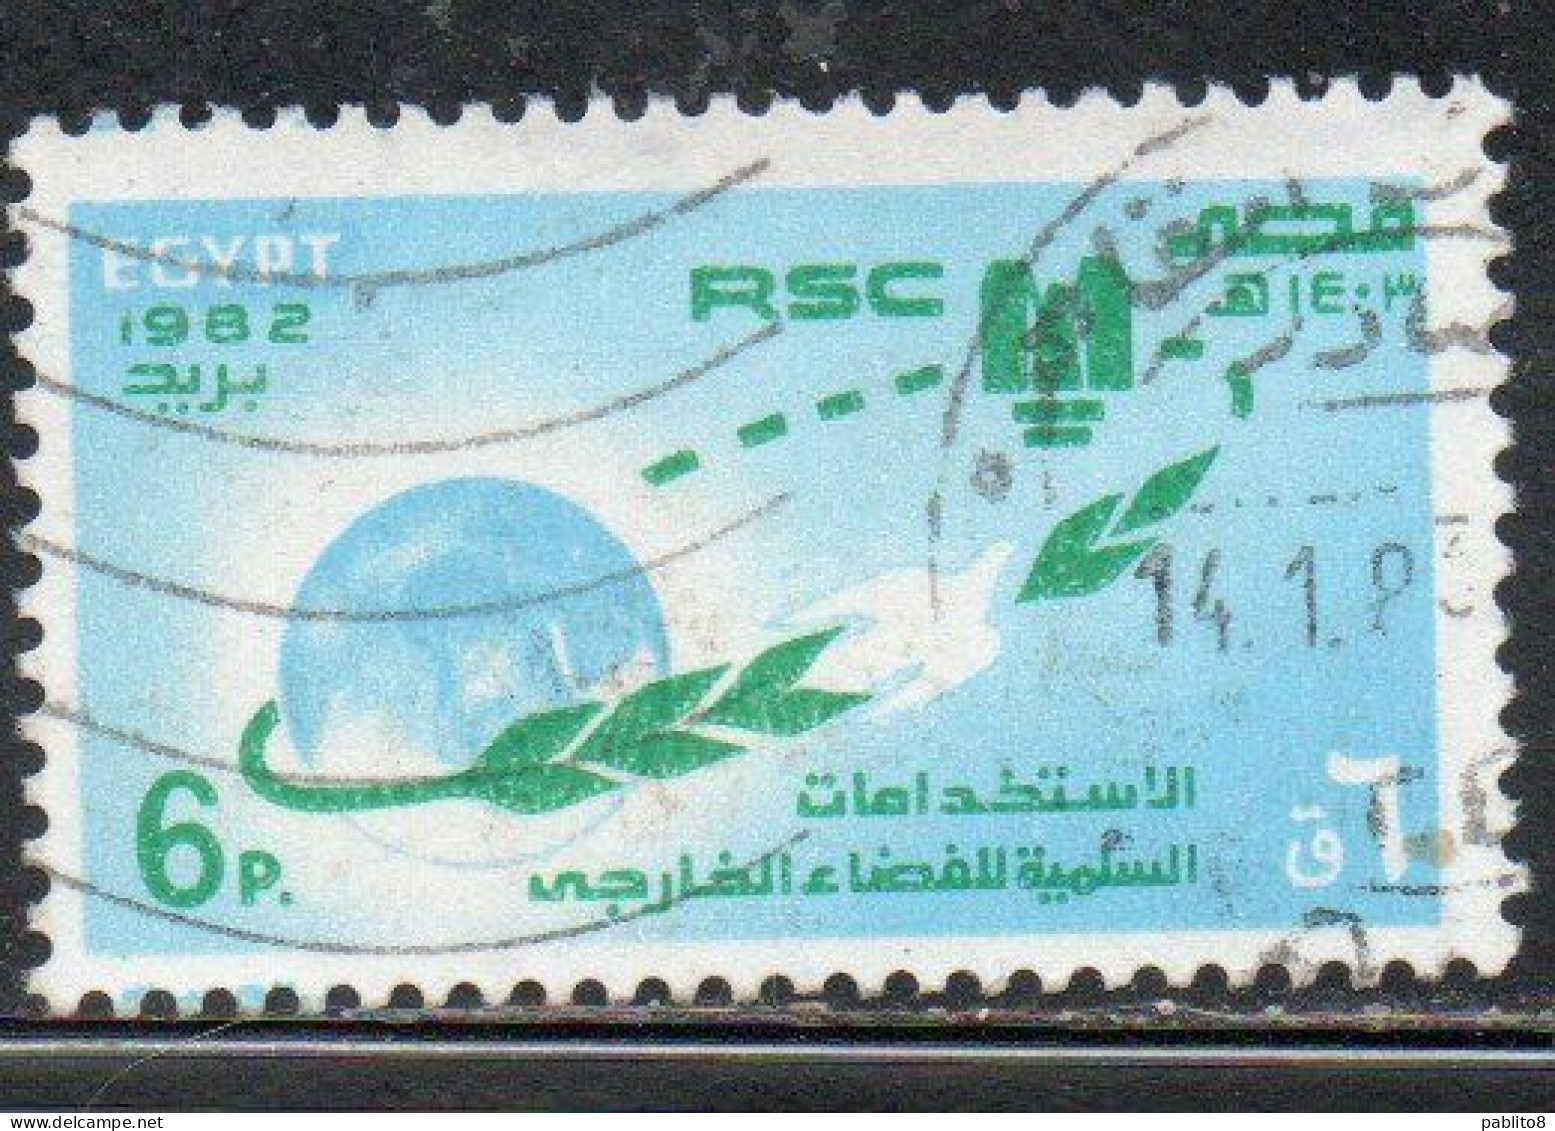 UAR EGYPT EGITTO 1982 UN ONU CONFERENCE ON PEACEFUL USES OF OUTER SPACE VIENNA 6p USED USATO OBLITERE' - Gebruikt